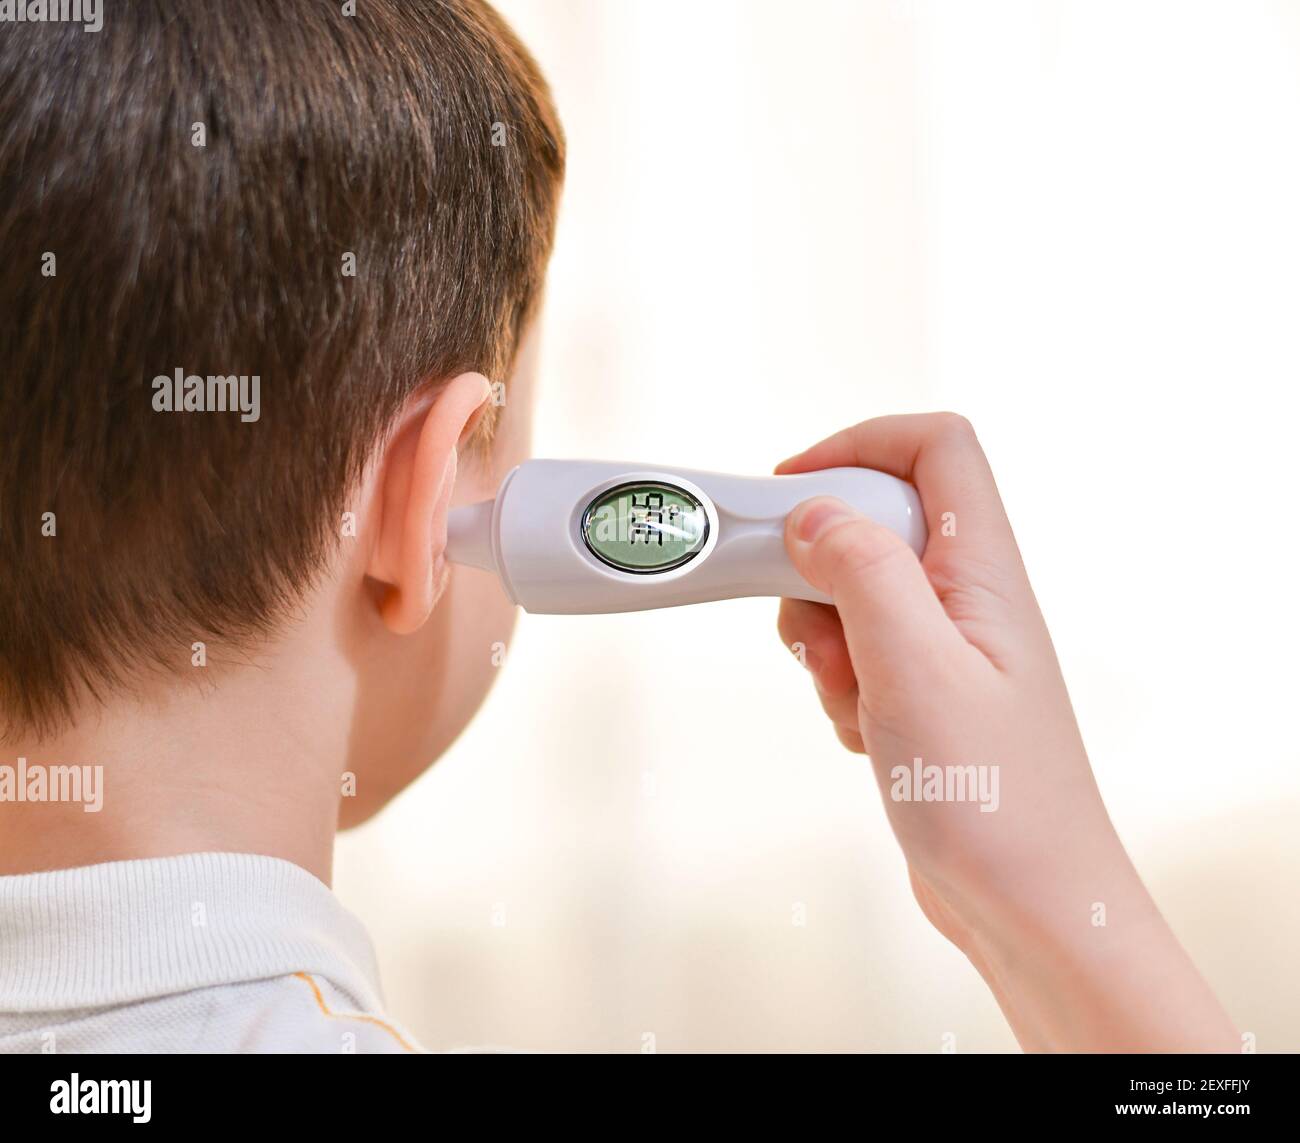 Measuring the temperature with an infrared earpiece for a child. Indicators on display 36.6, version of the norm. Stock Photo